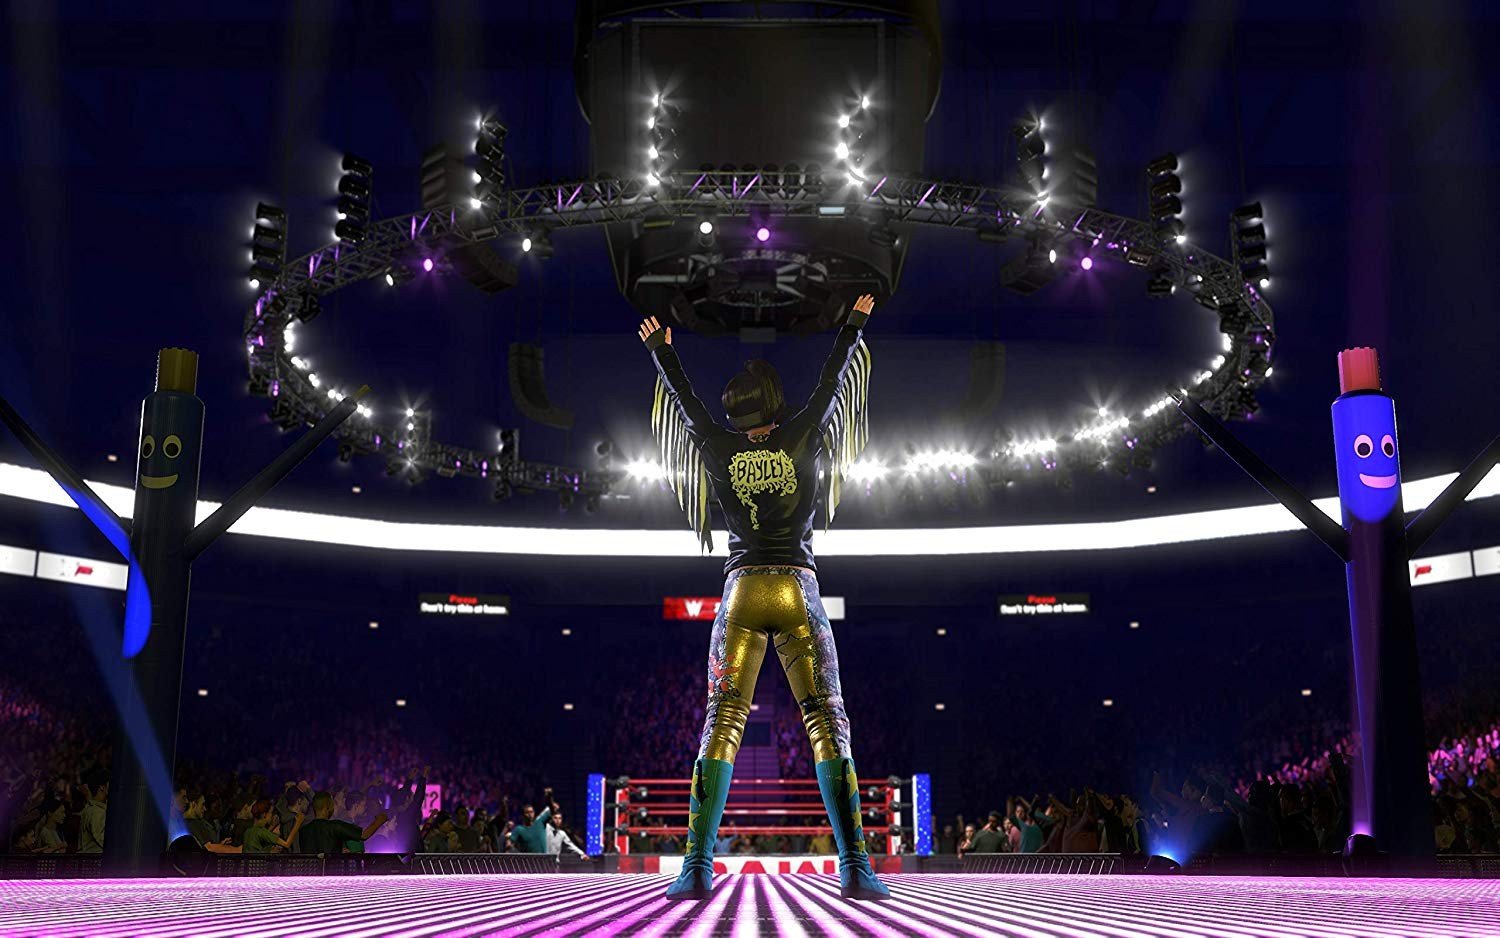 wwe 2k20, wwe game, ps4, playstation,xone, xbox one,us,north america Au, australia, Asia, eu, europe release date, gameplay, features, price, pre-order,2k sports, visual concepts